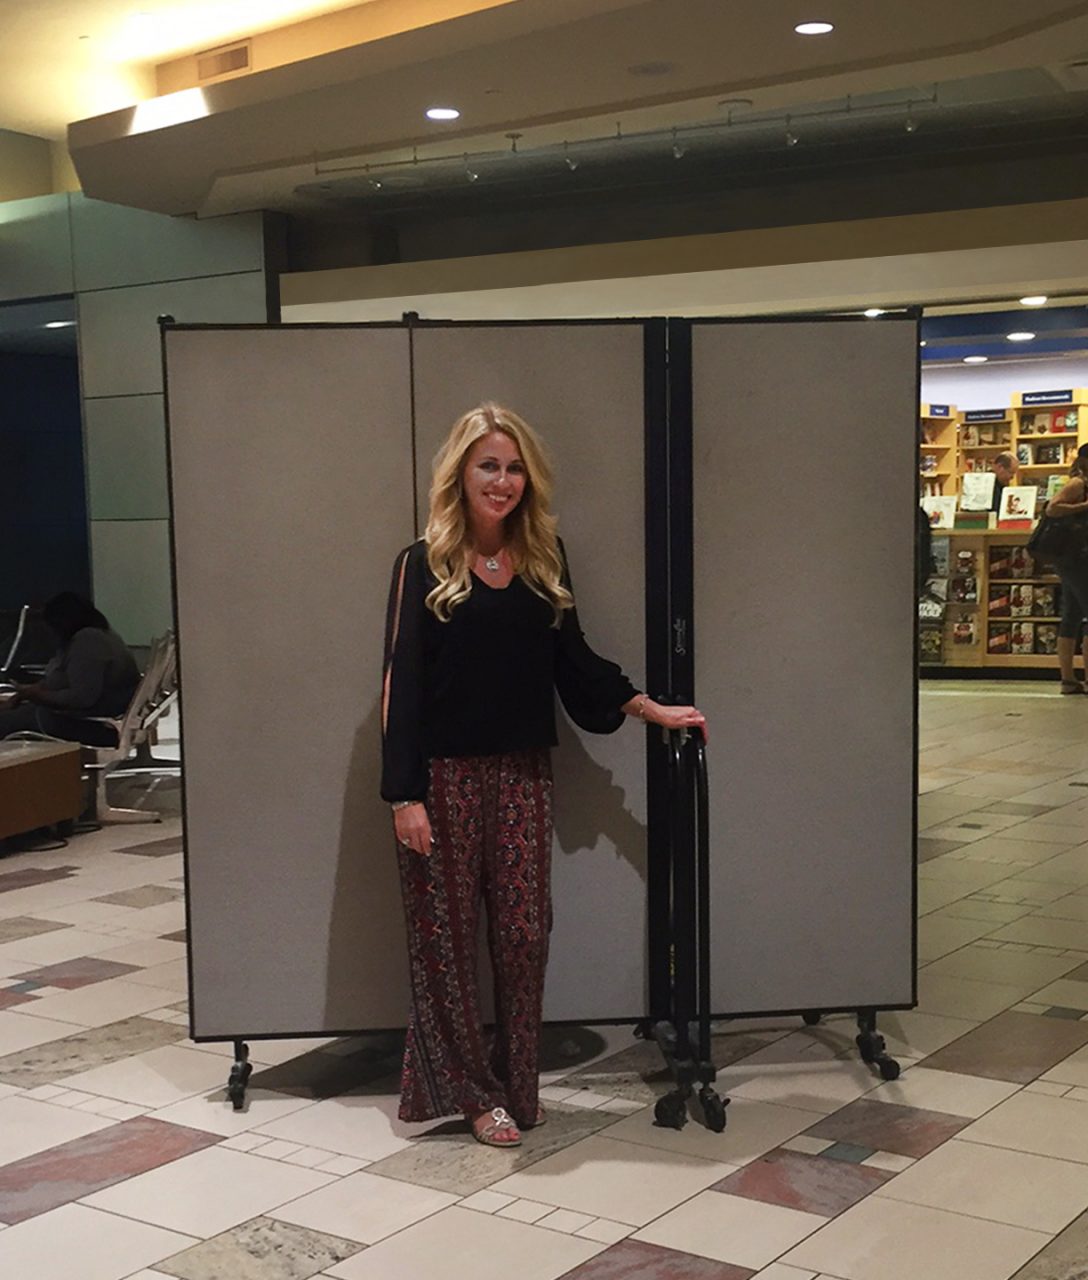 A woman stands in front of a portable wall on wheels in an airport